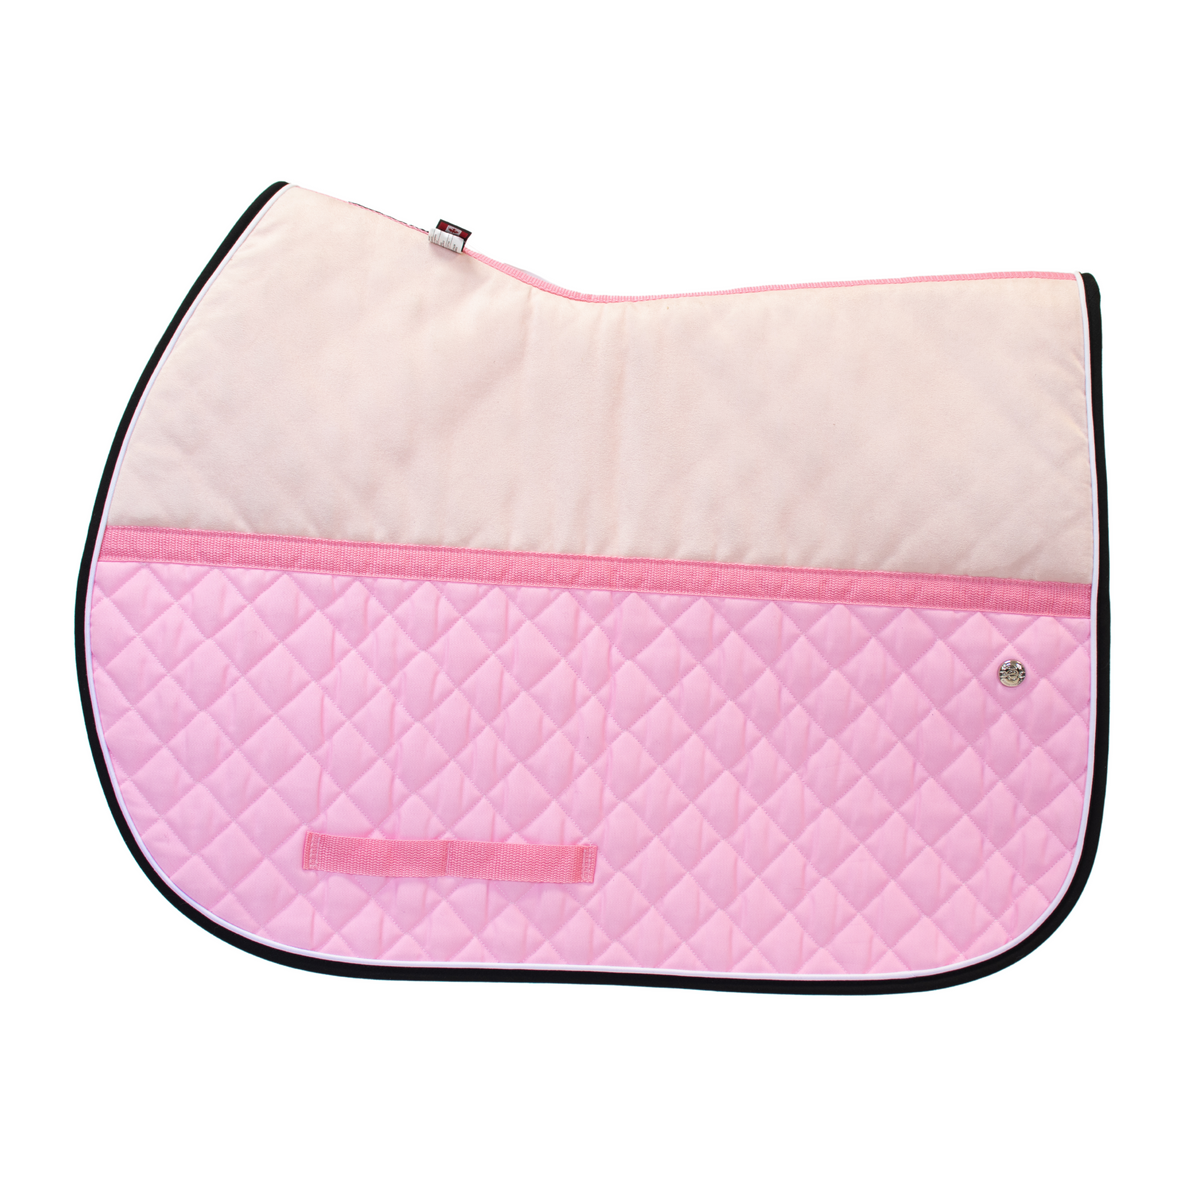 Friction Free Jump Pad in Pink/White/Black